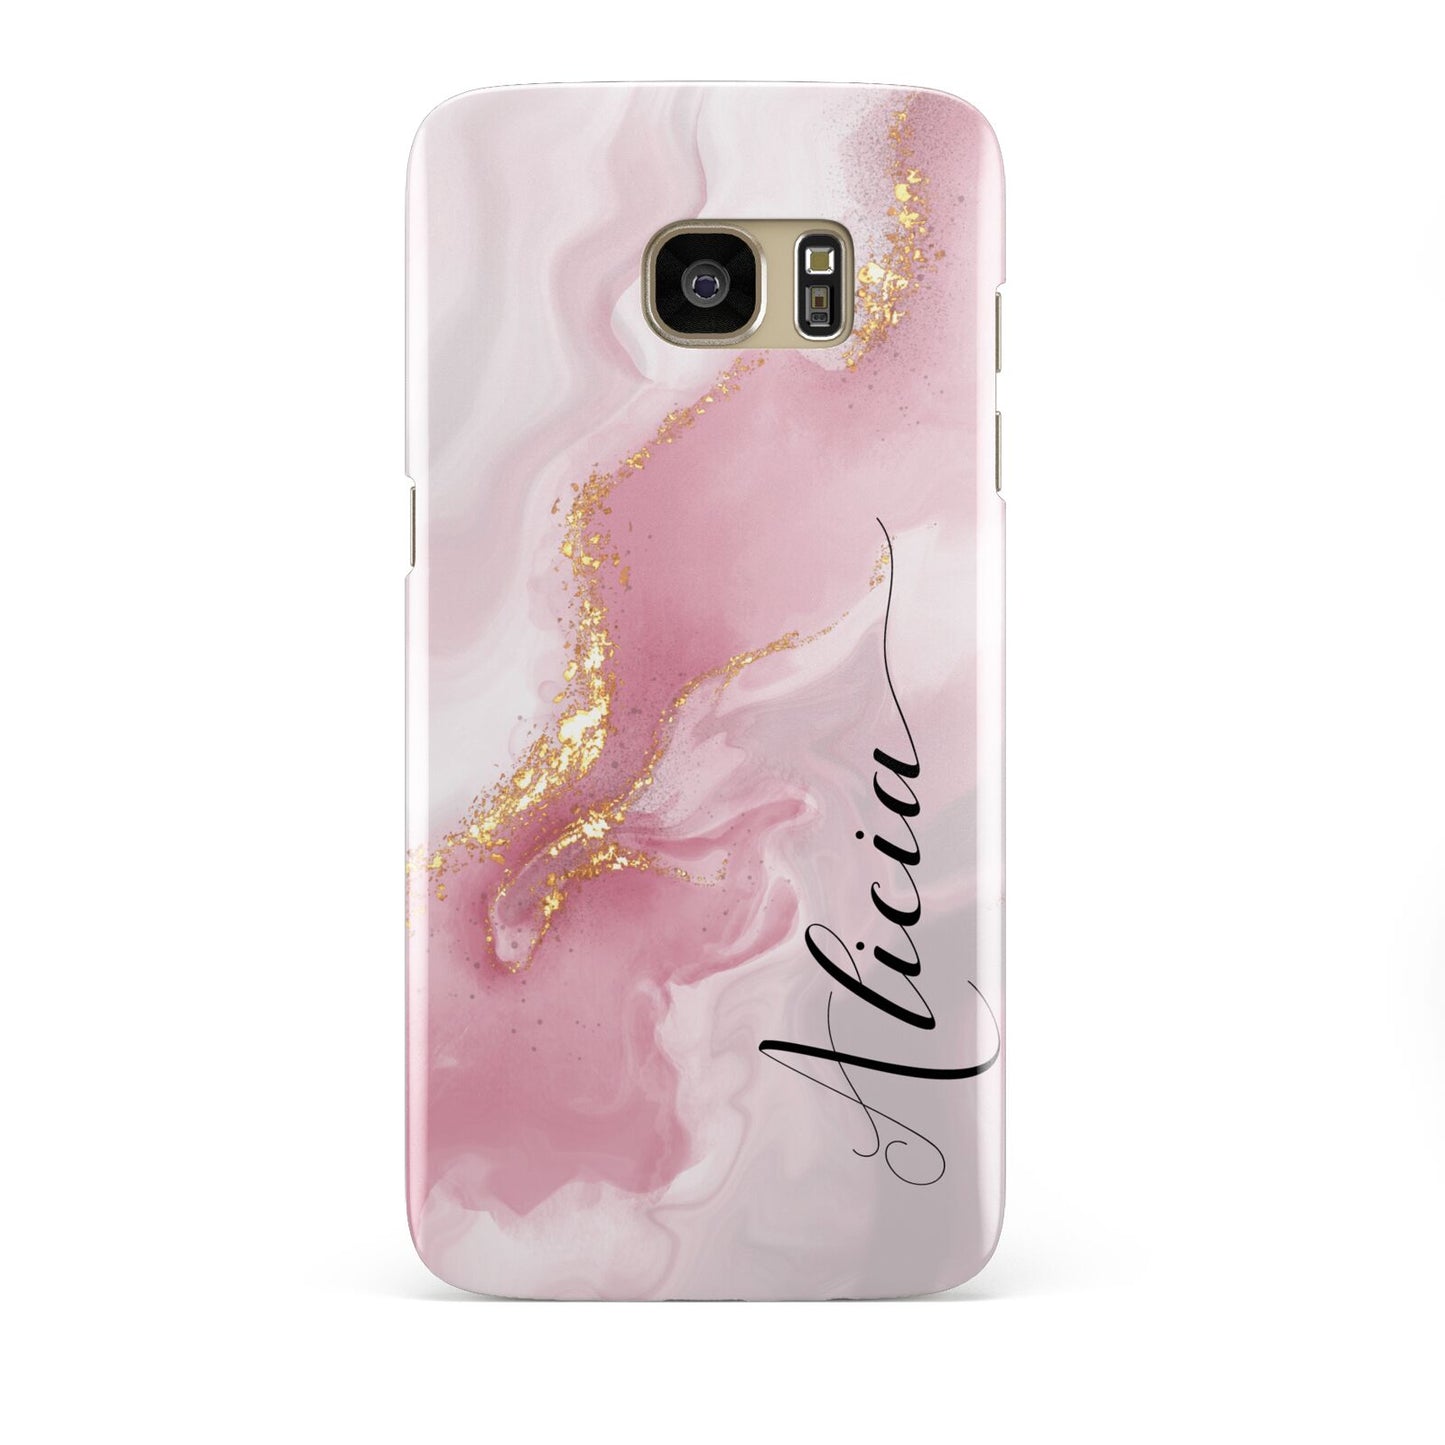 Personalised Pink Marble Samsung Galaxy S7 Edge Case